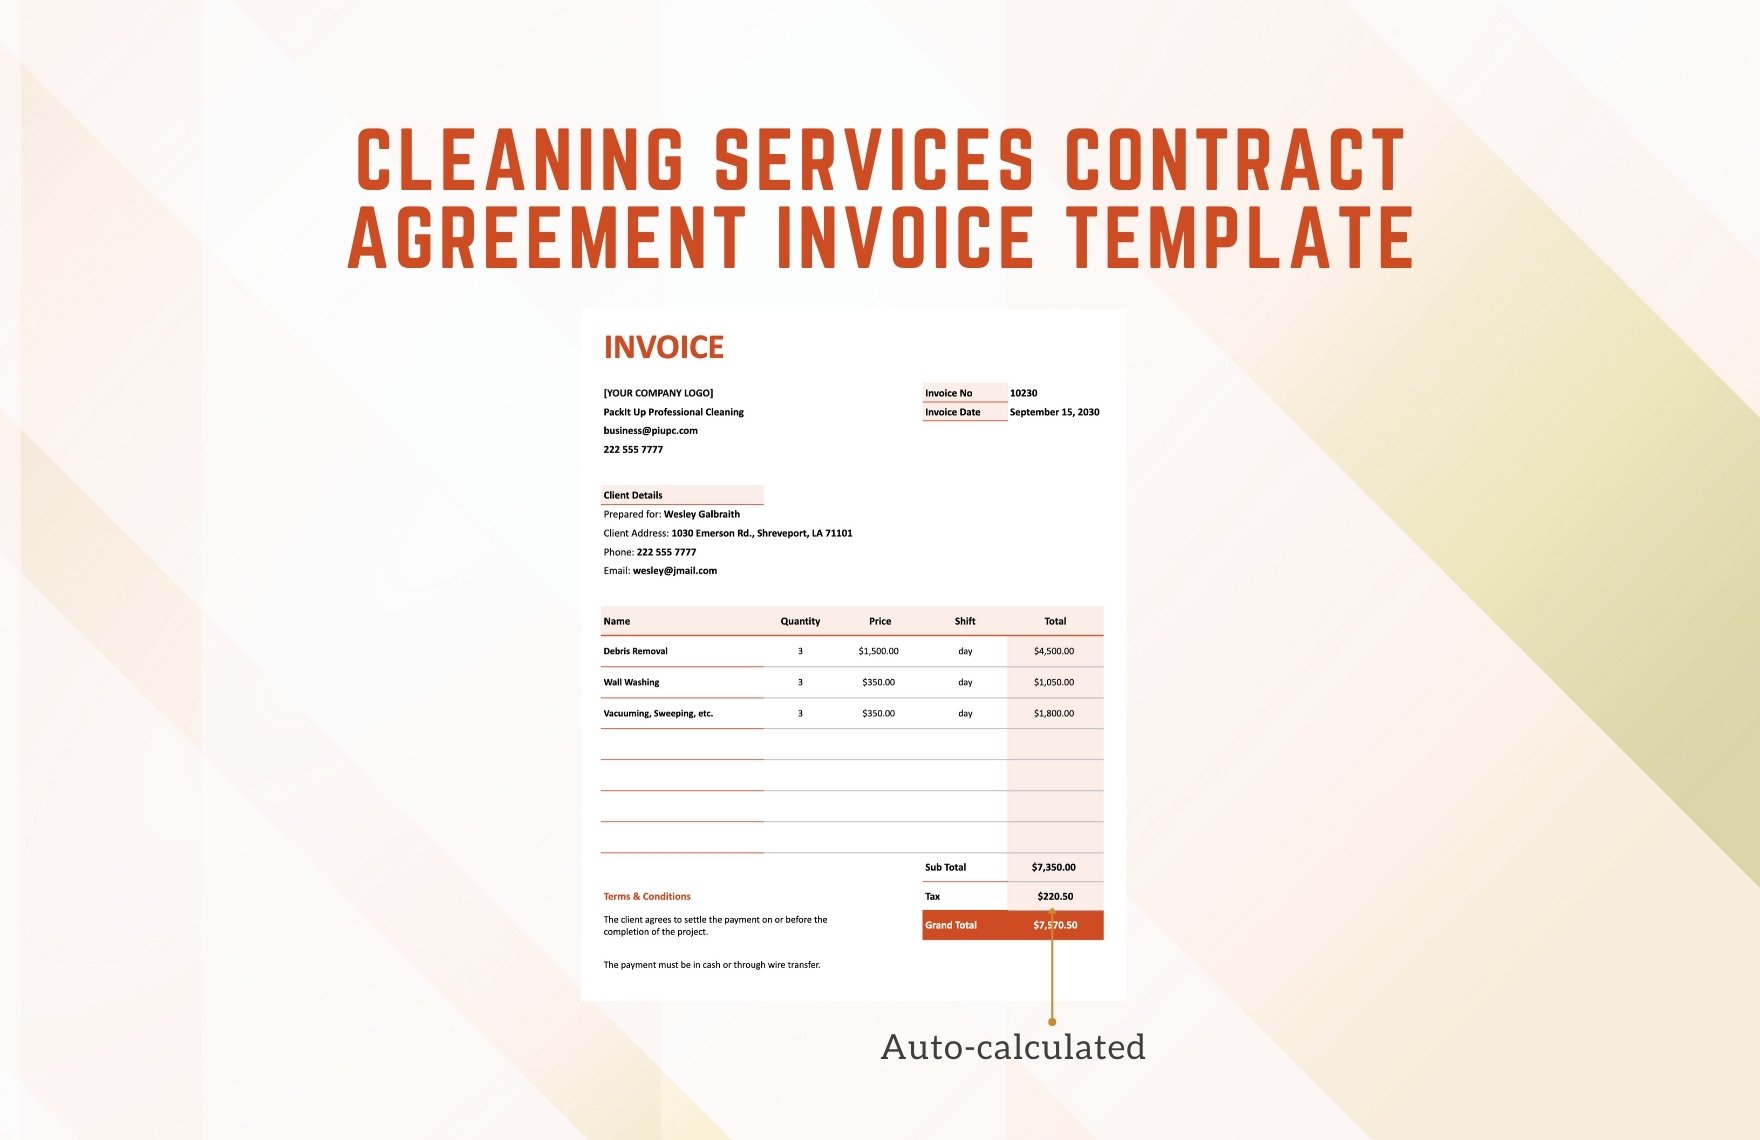 Cleaning Services Contract Agreement Invoice Template